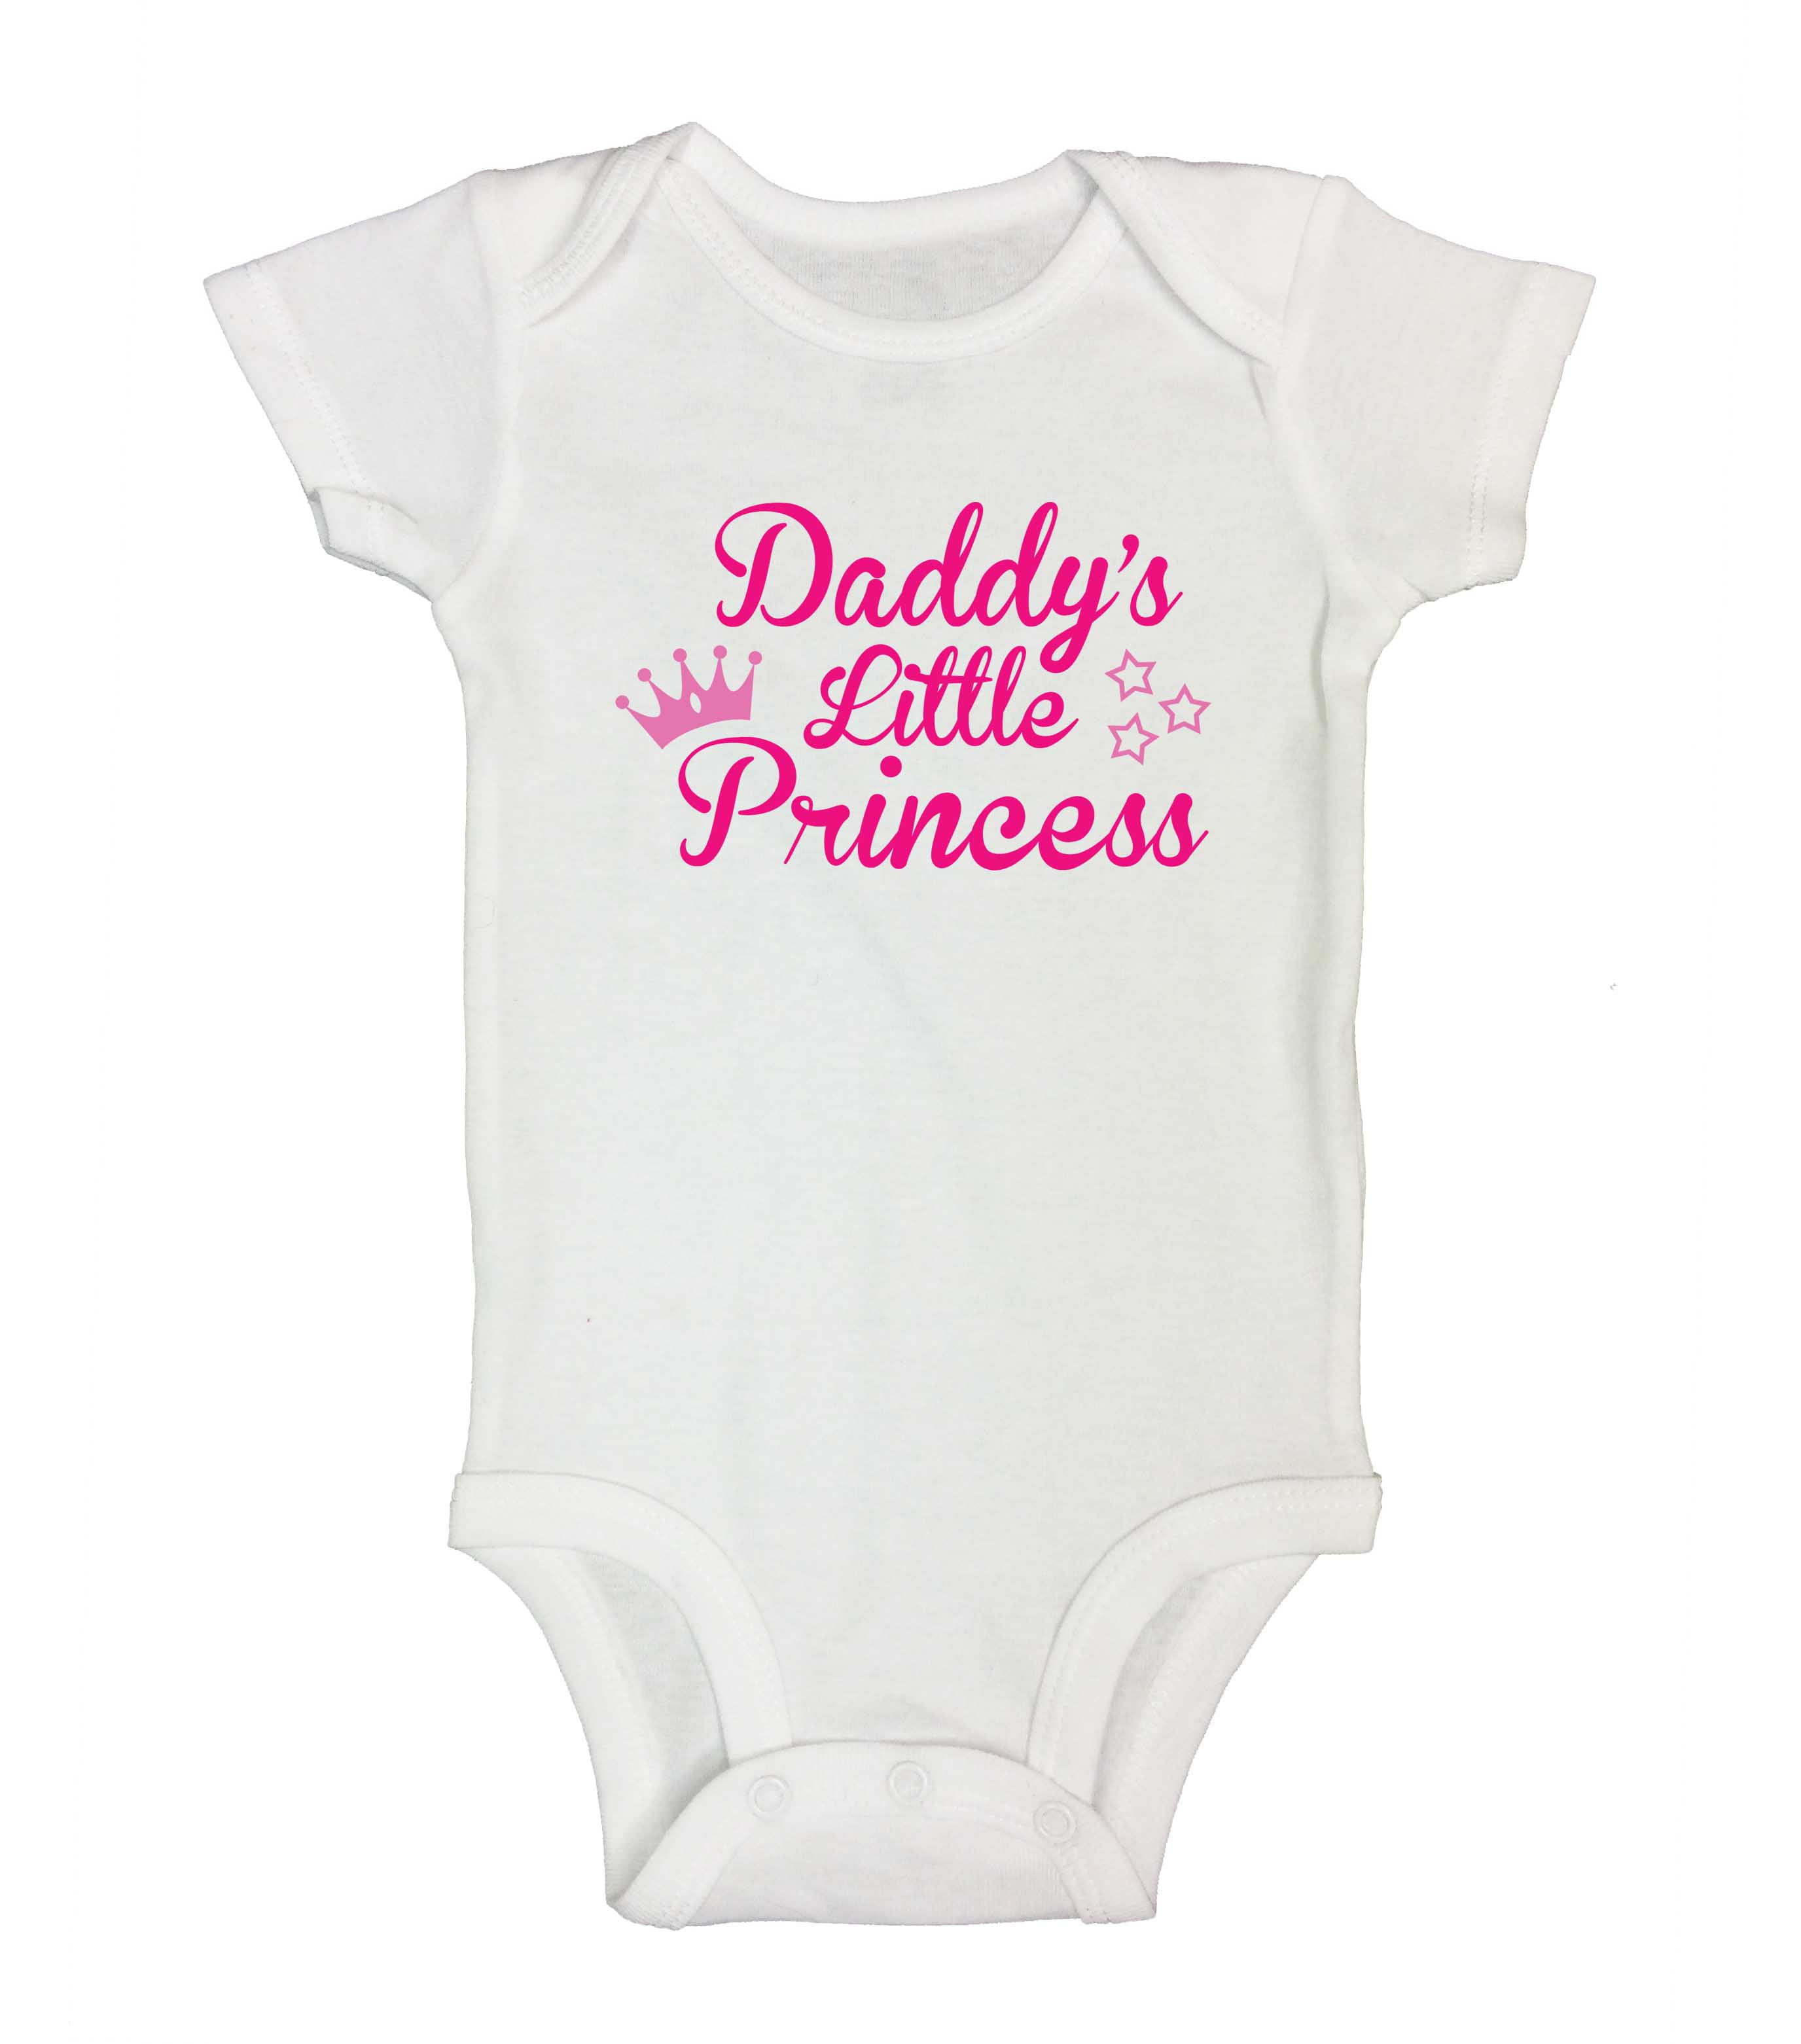 daddy's little girl baby clothes